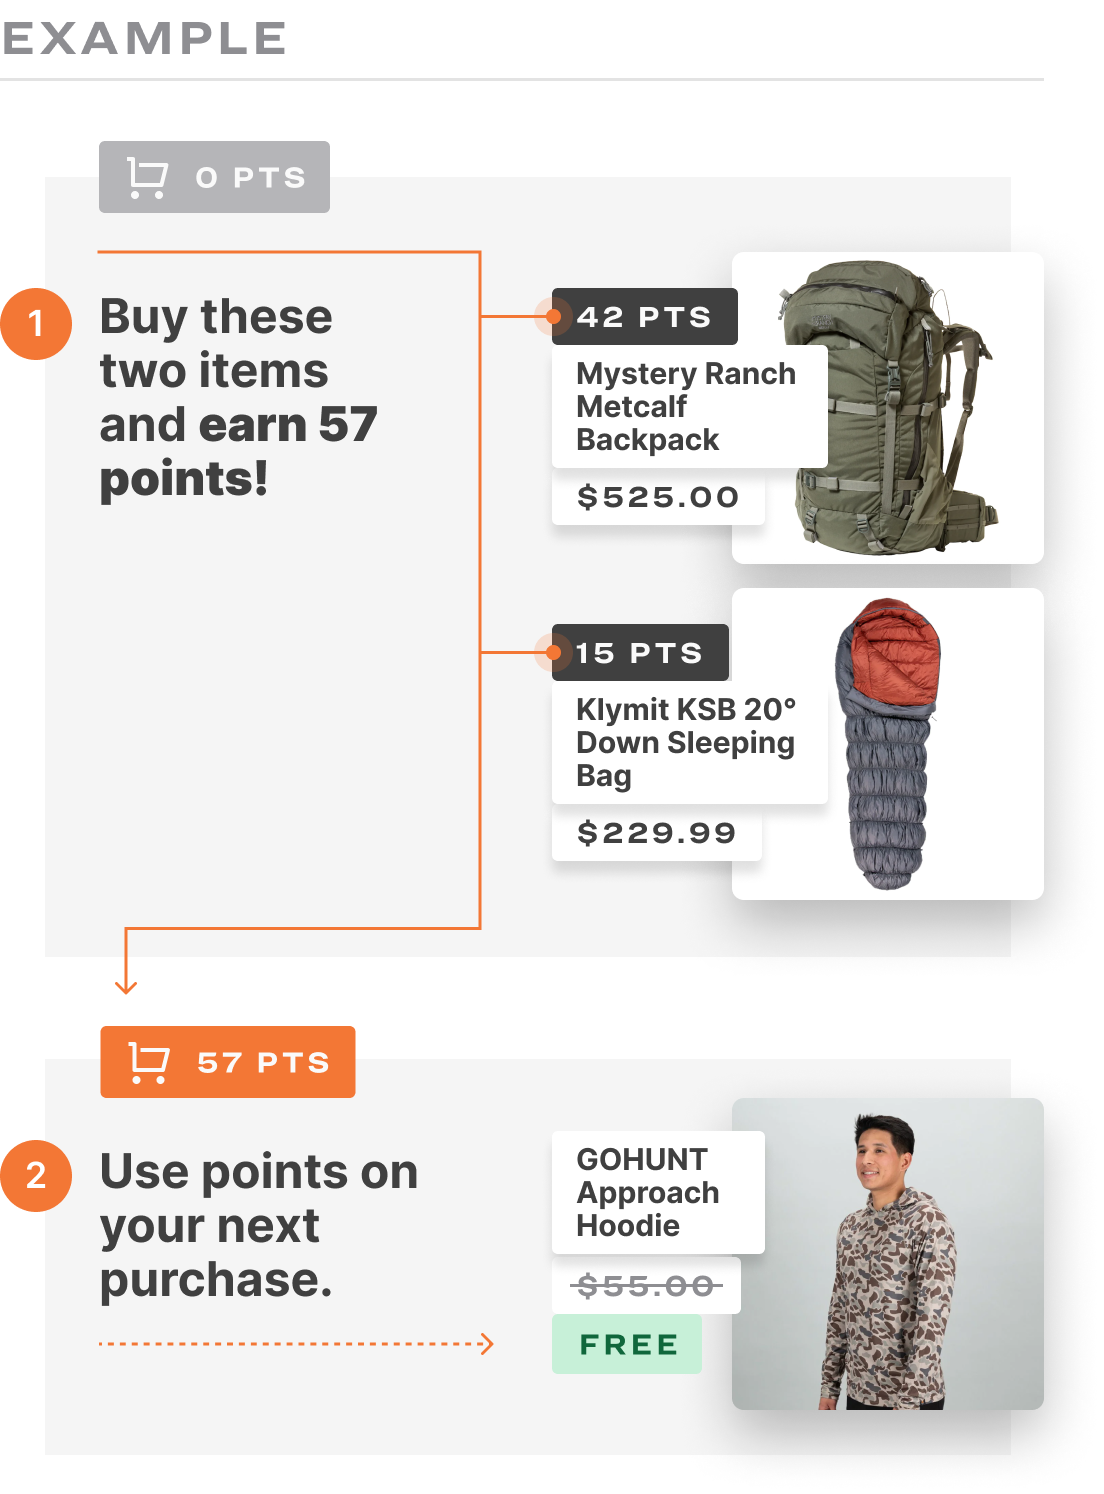 How gear reward points help you put more gear into your kit for less